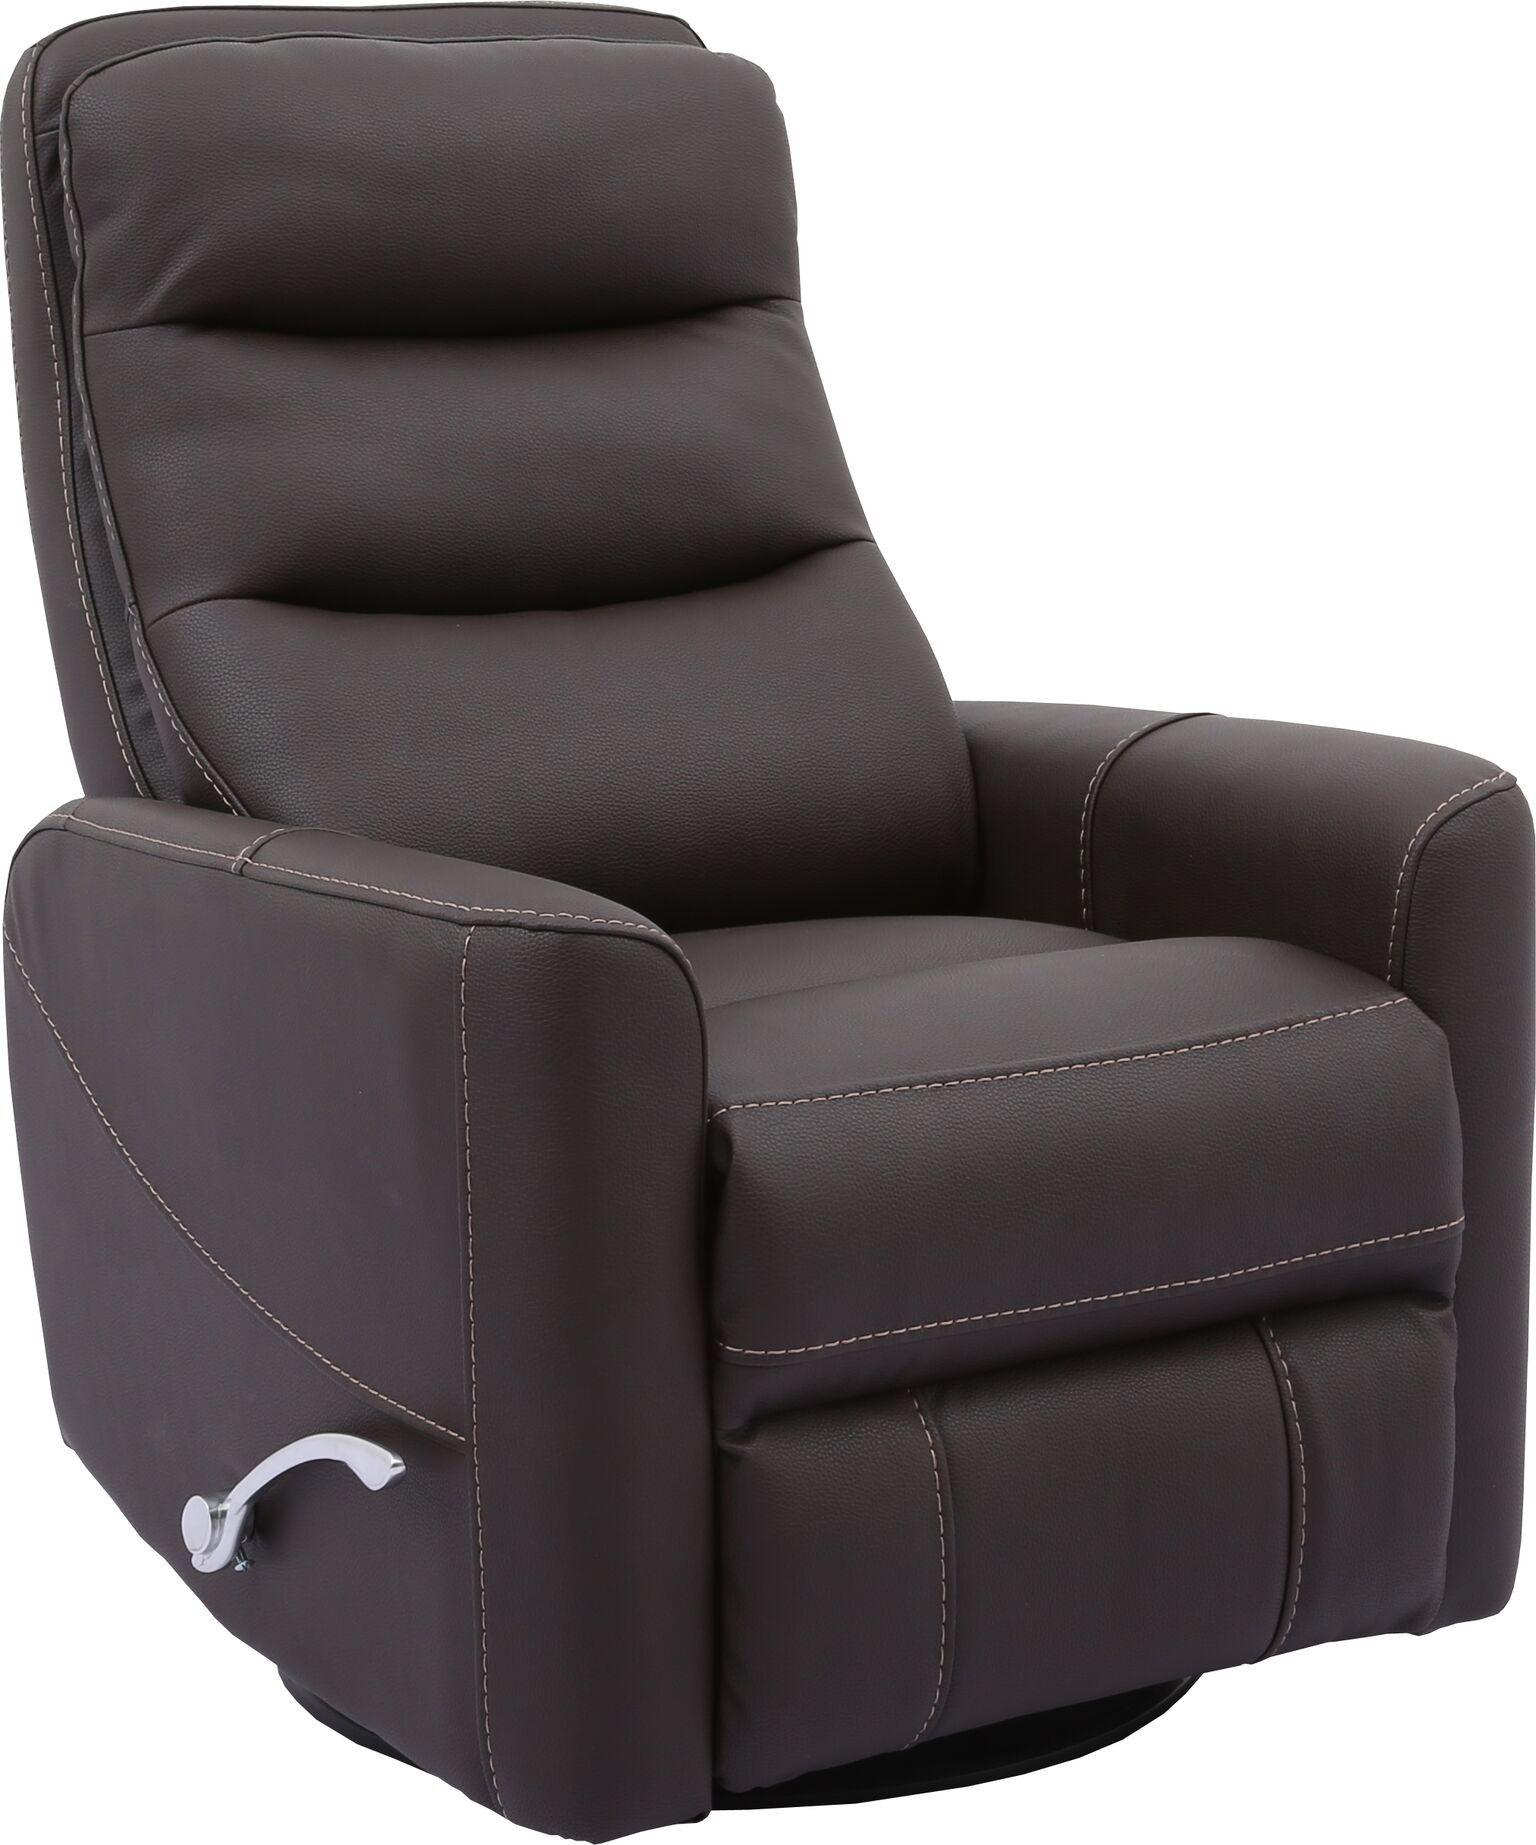 Hercules  Chocolate  Swivel Glider Recliner With Articulating Headrest Throughout Hercules Oyster Swivel Glider Recliners (View 3 of 25)